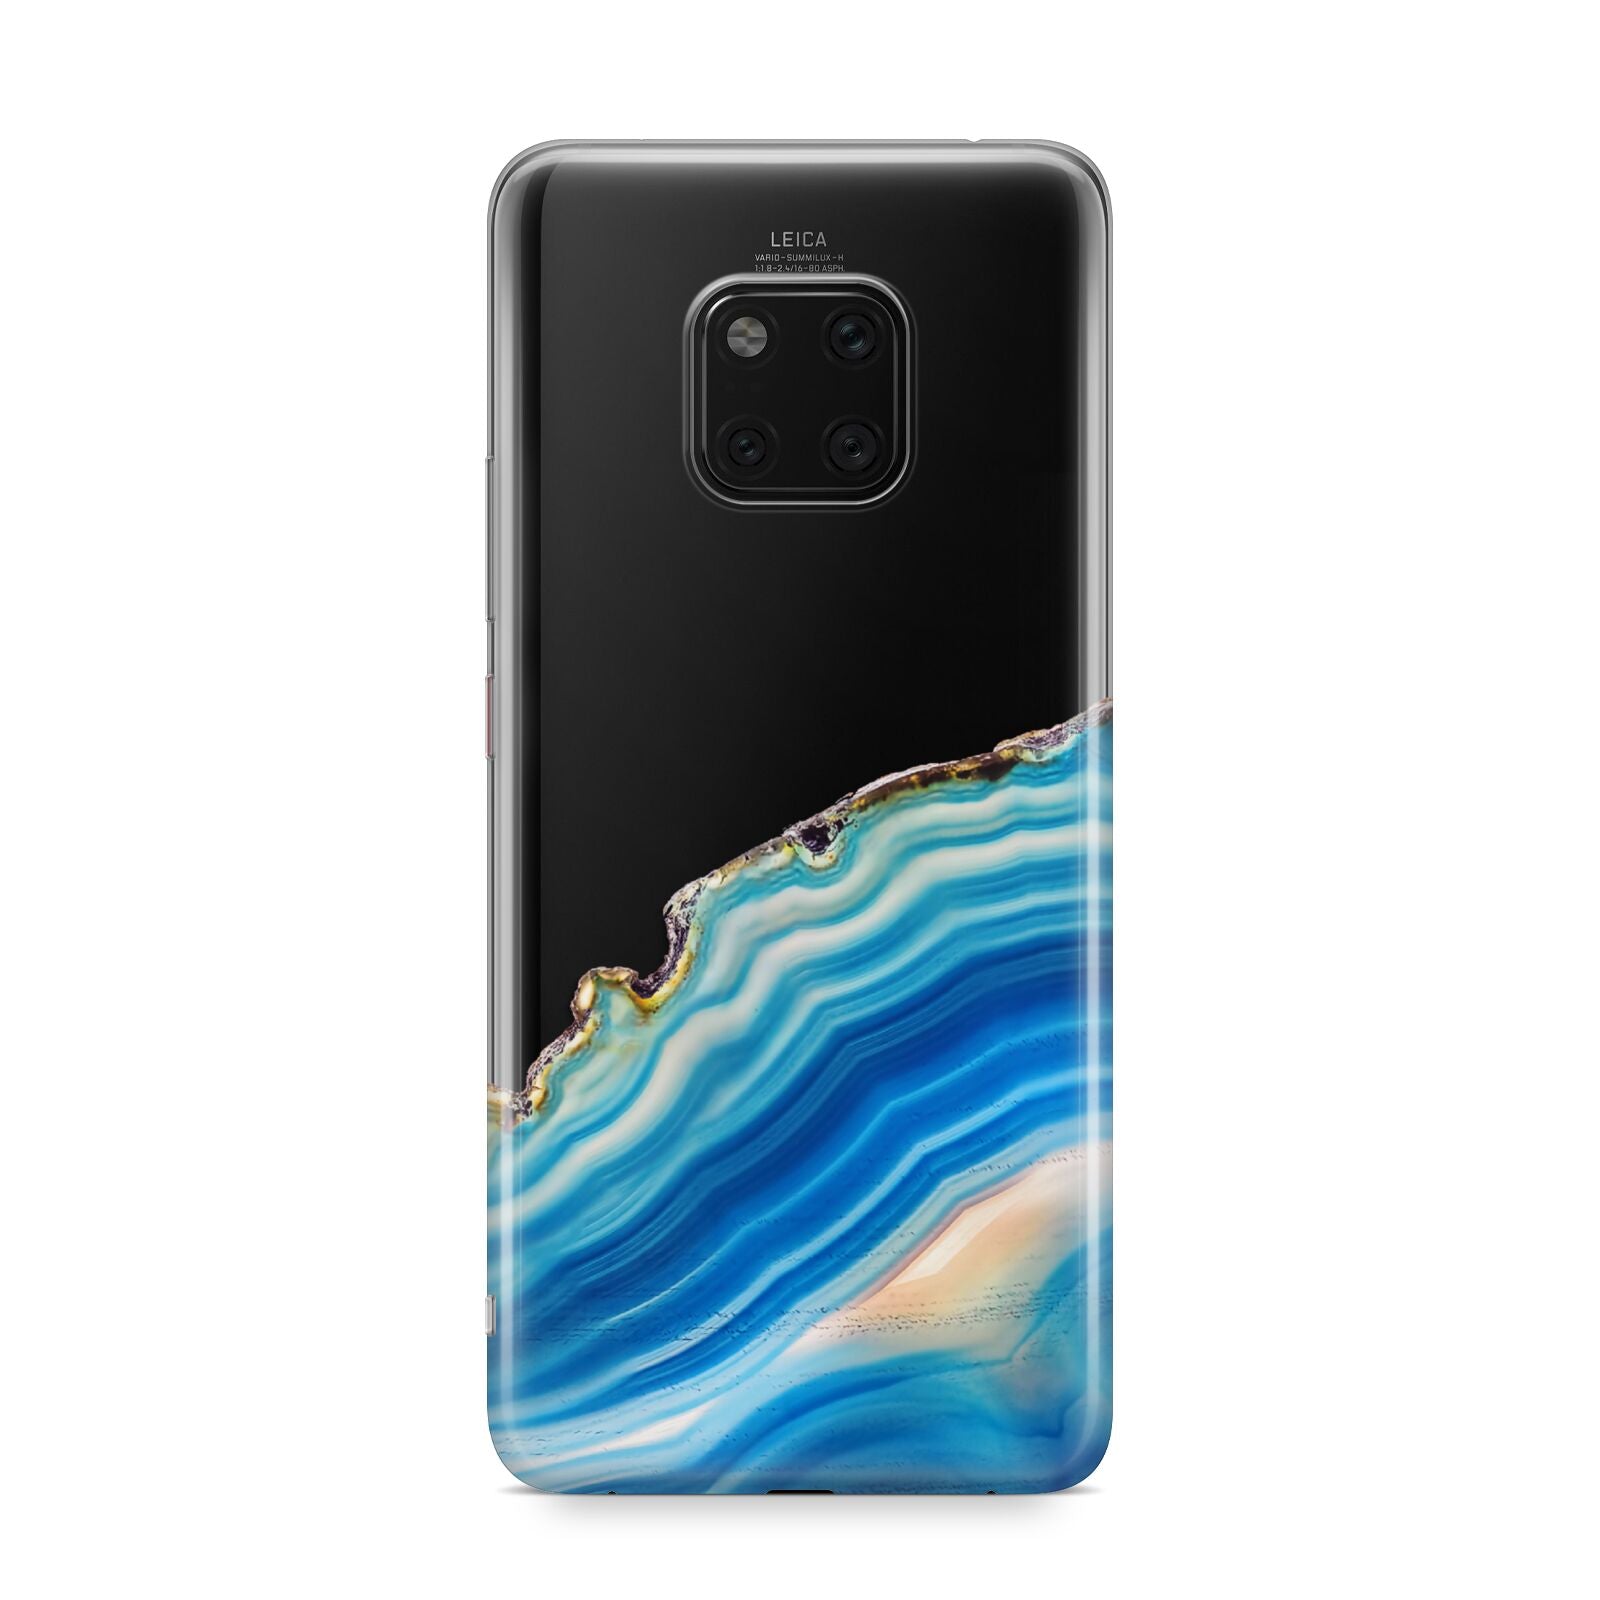 Agate Pale Blue and Bright Blue Huawei Mate 20 Pro Phone Case